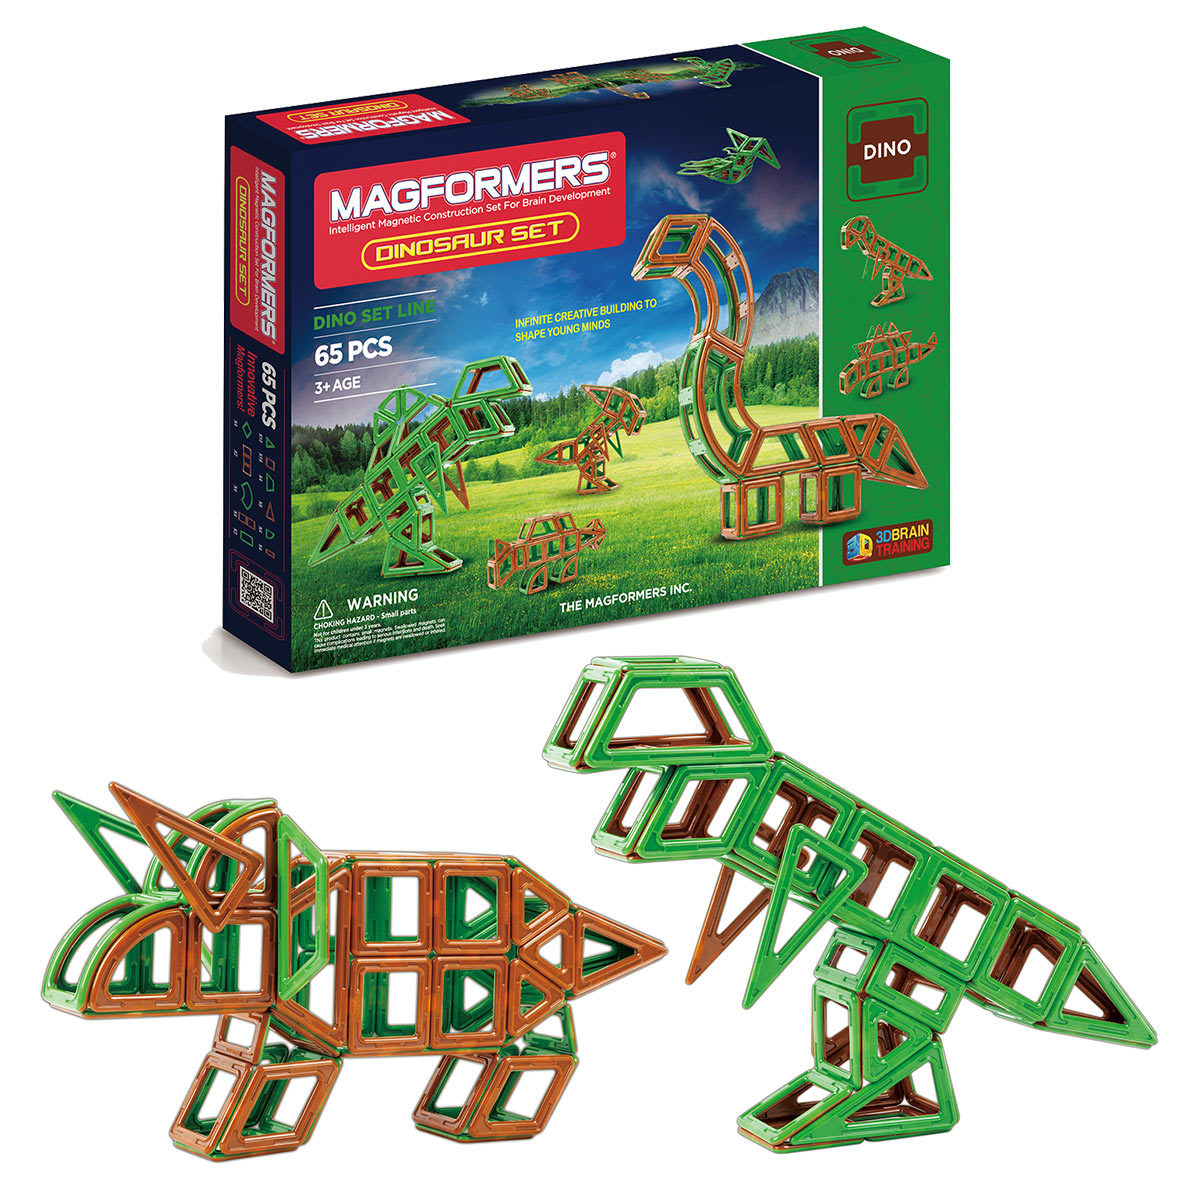 Magformers Magnetic Construction Dinosaur 65 Piece Set (3+ Years)